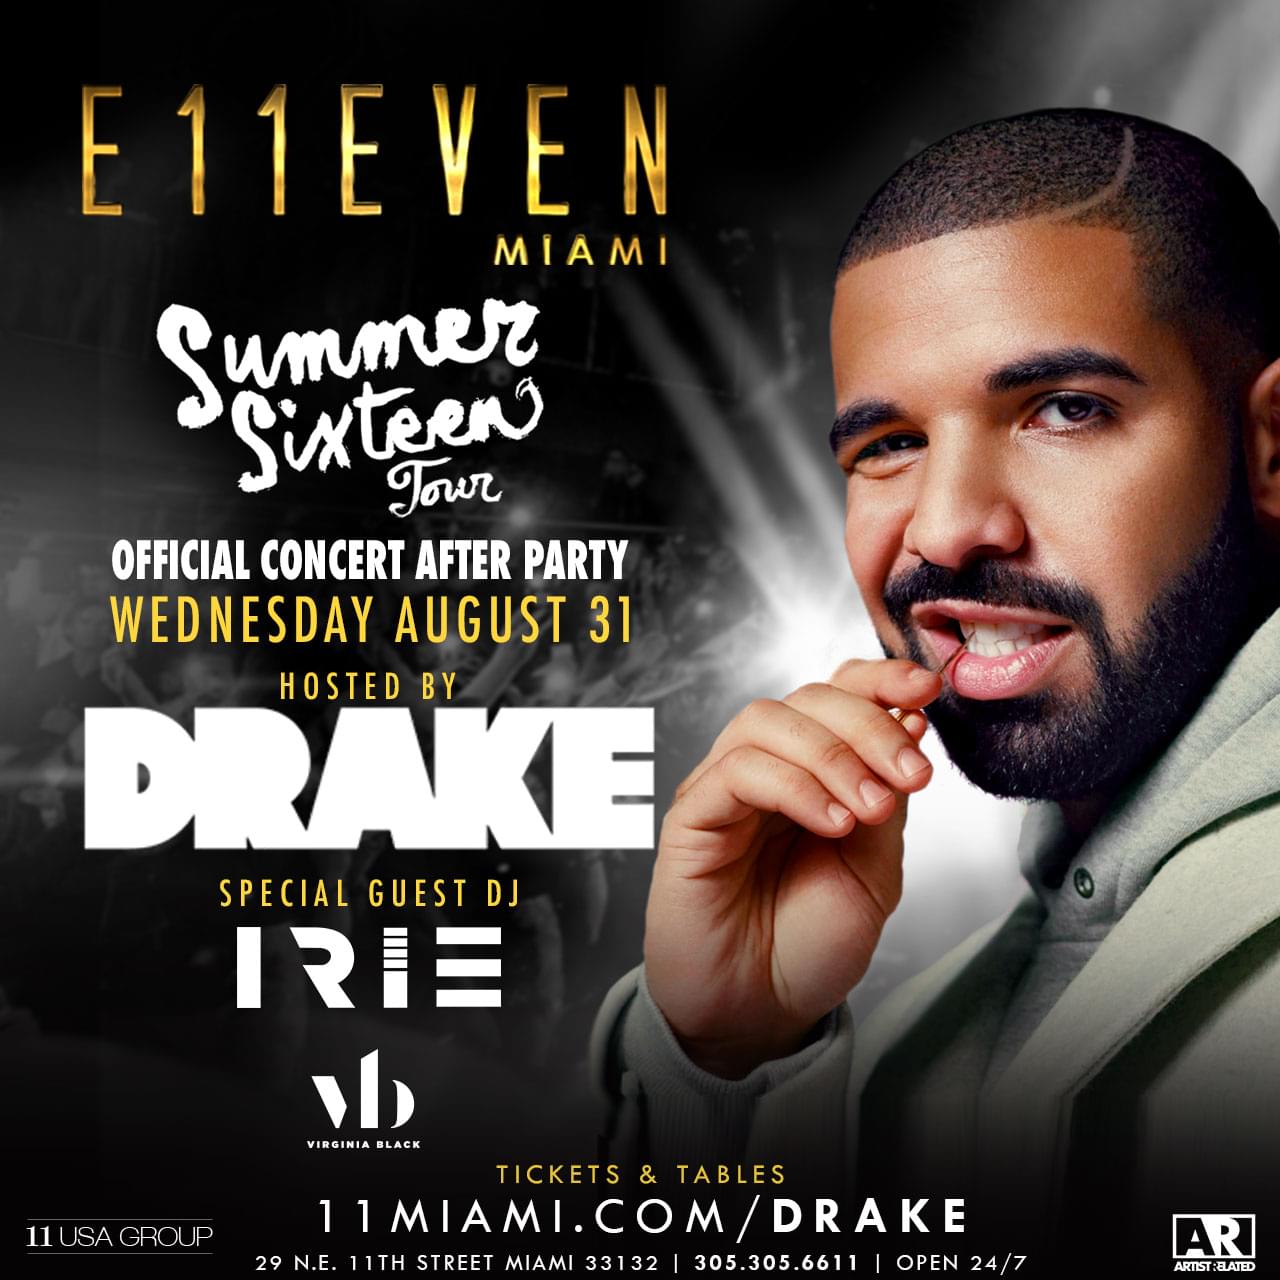 DRAKE OFFICIAL CONCERT AFTER PARTY DAY 2 Tickets at E11EVEN Miami in